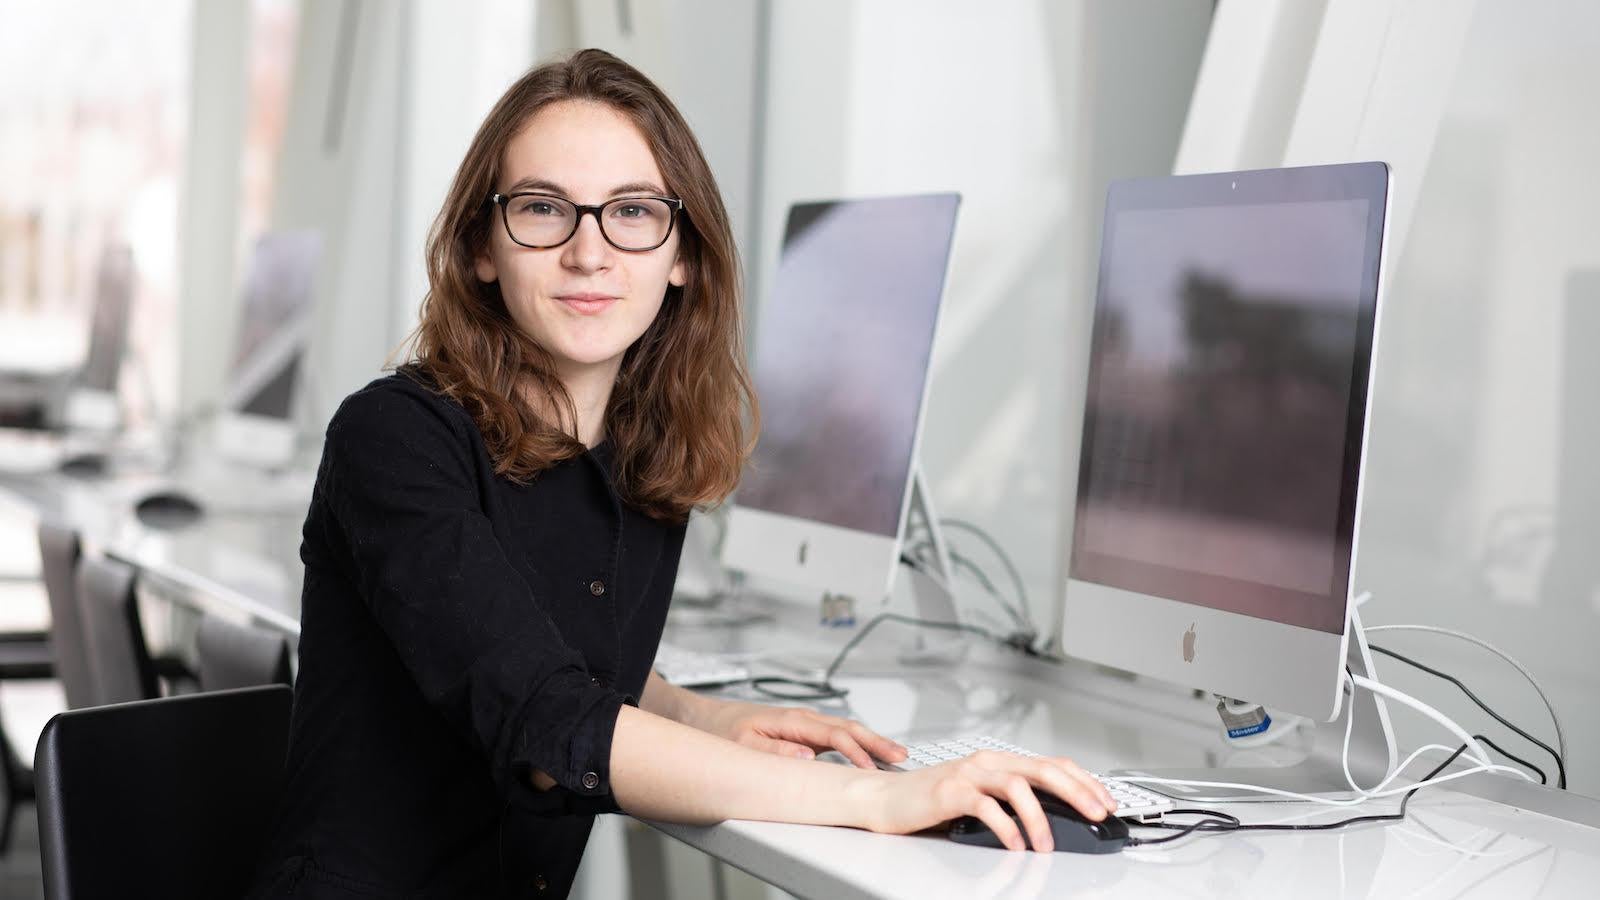 A student wearing glasses sitting in front of a desktop computer.